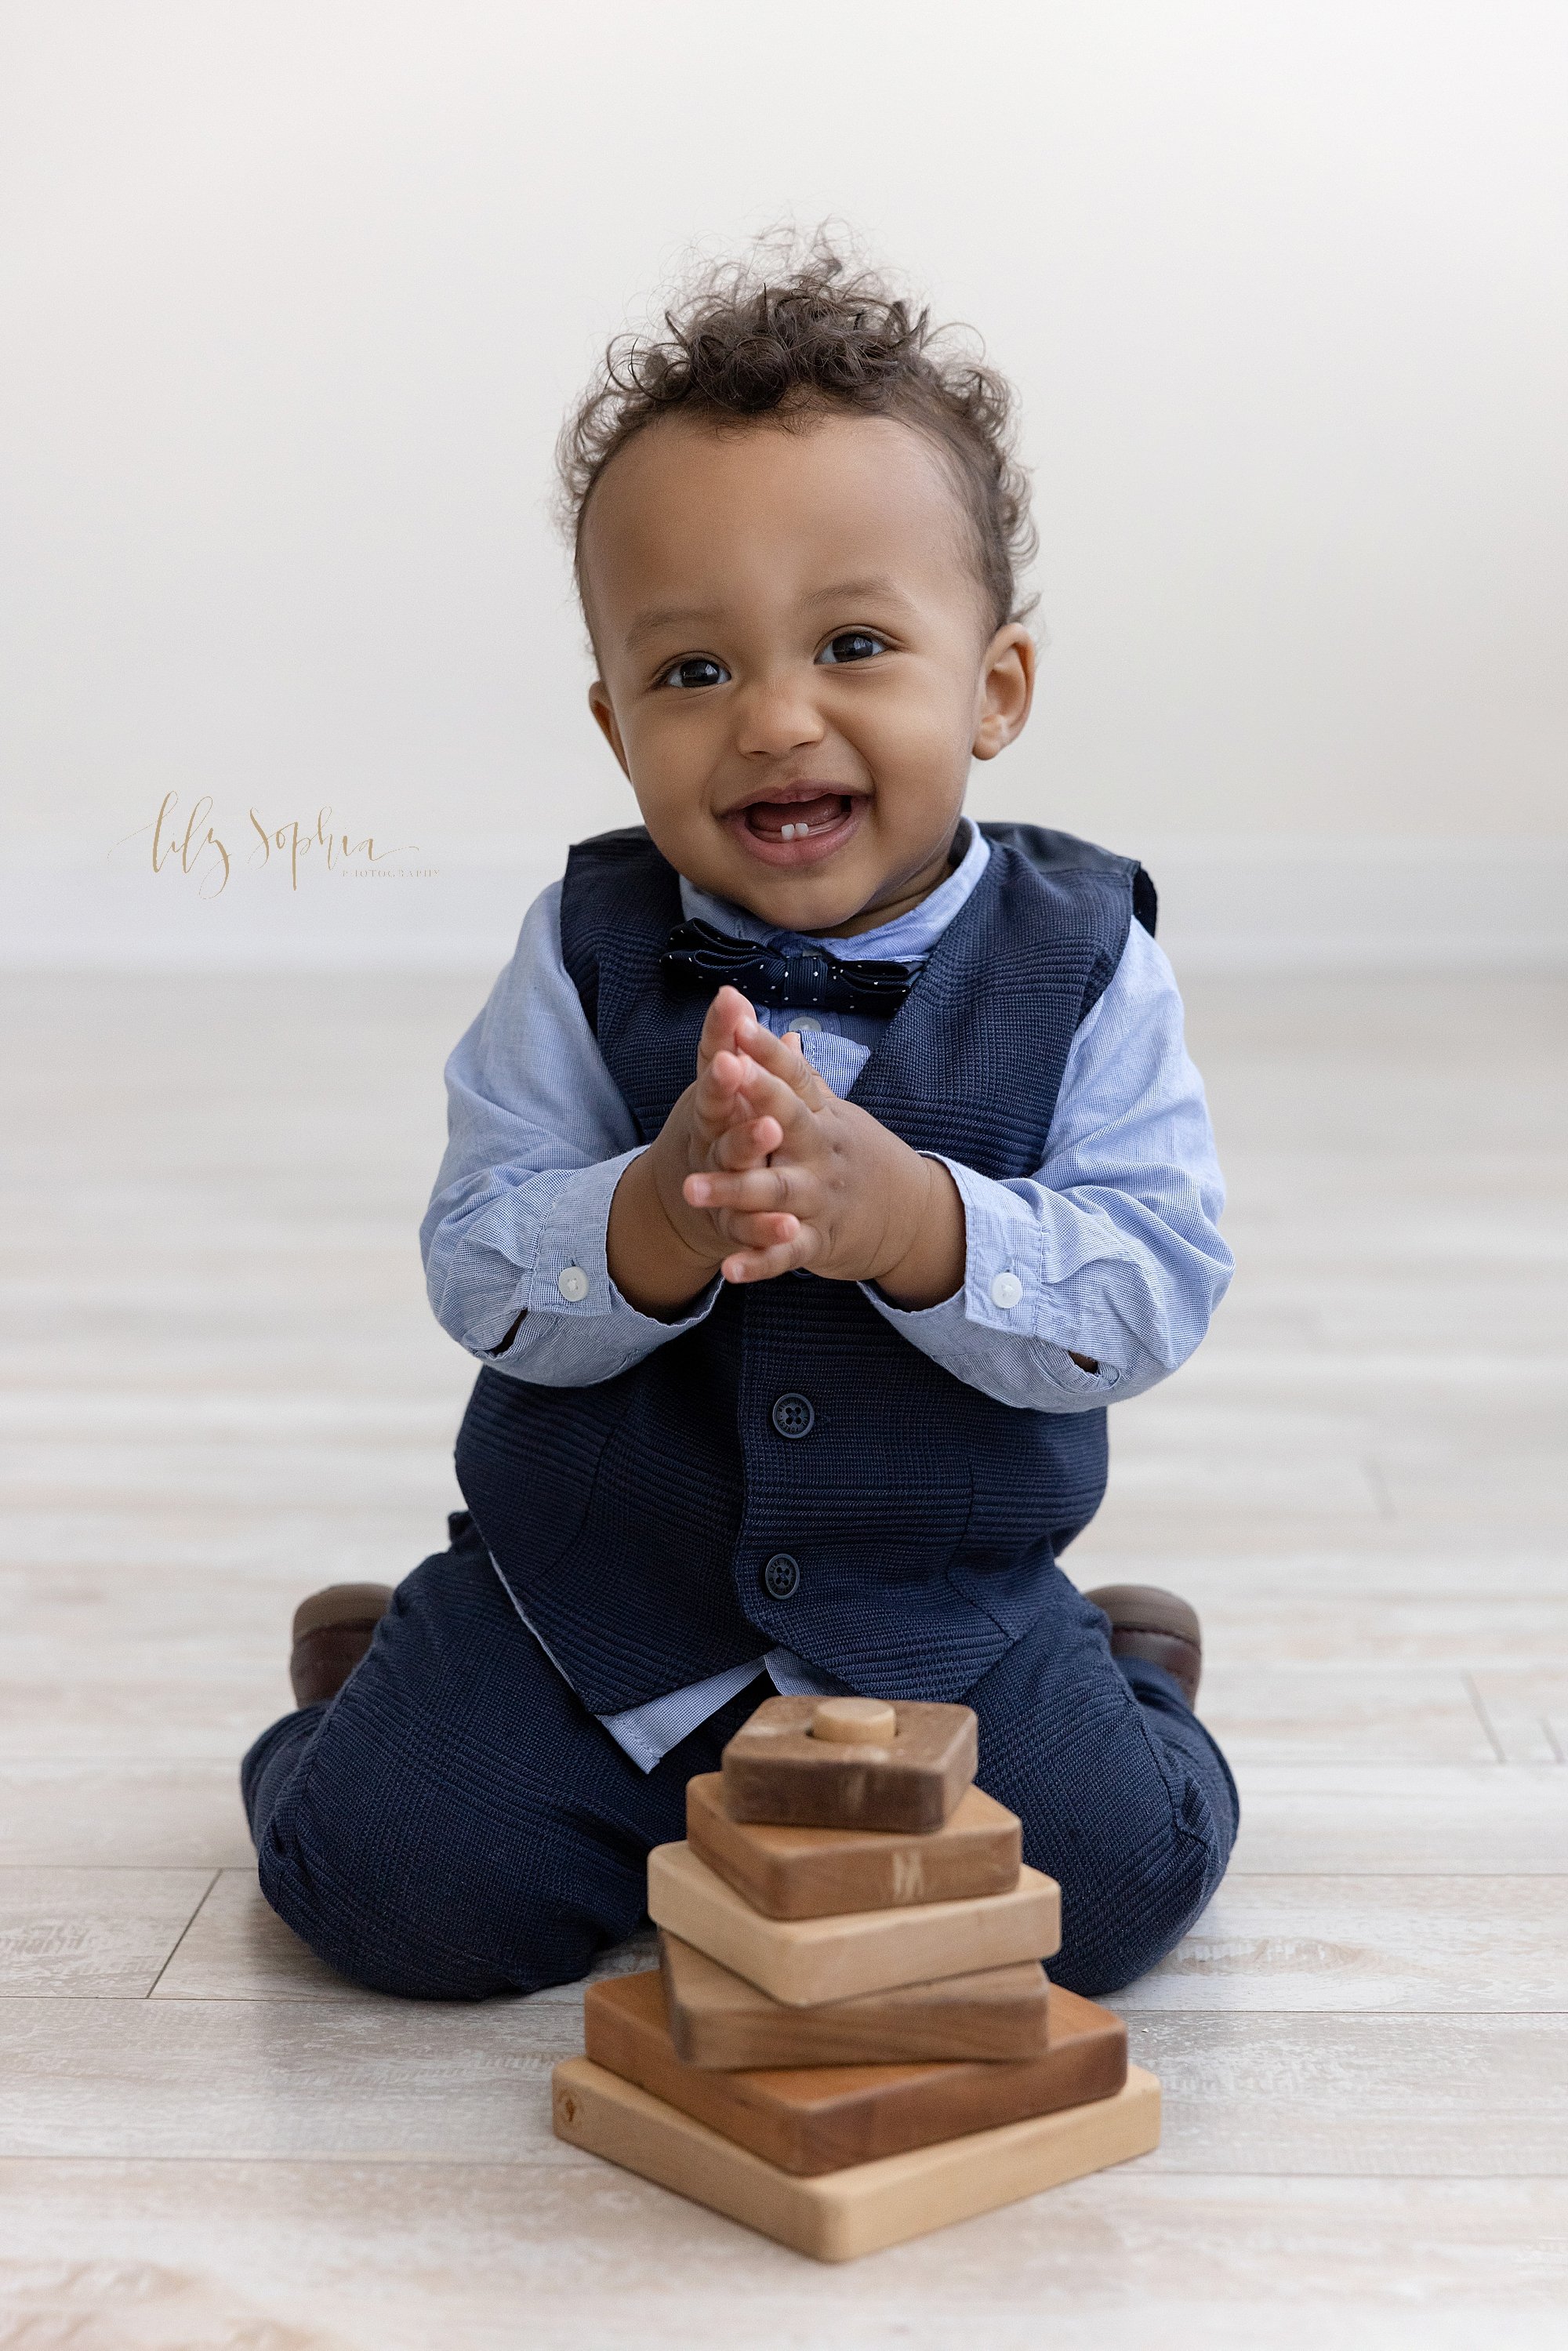  Proud one year old claps his hands after putting the last piece on a wooden stacking toy to celebrate his first birthday in a photography studio near Ansley Park that uses natural light. 